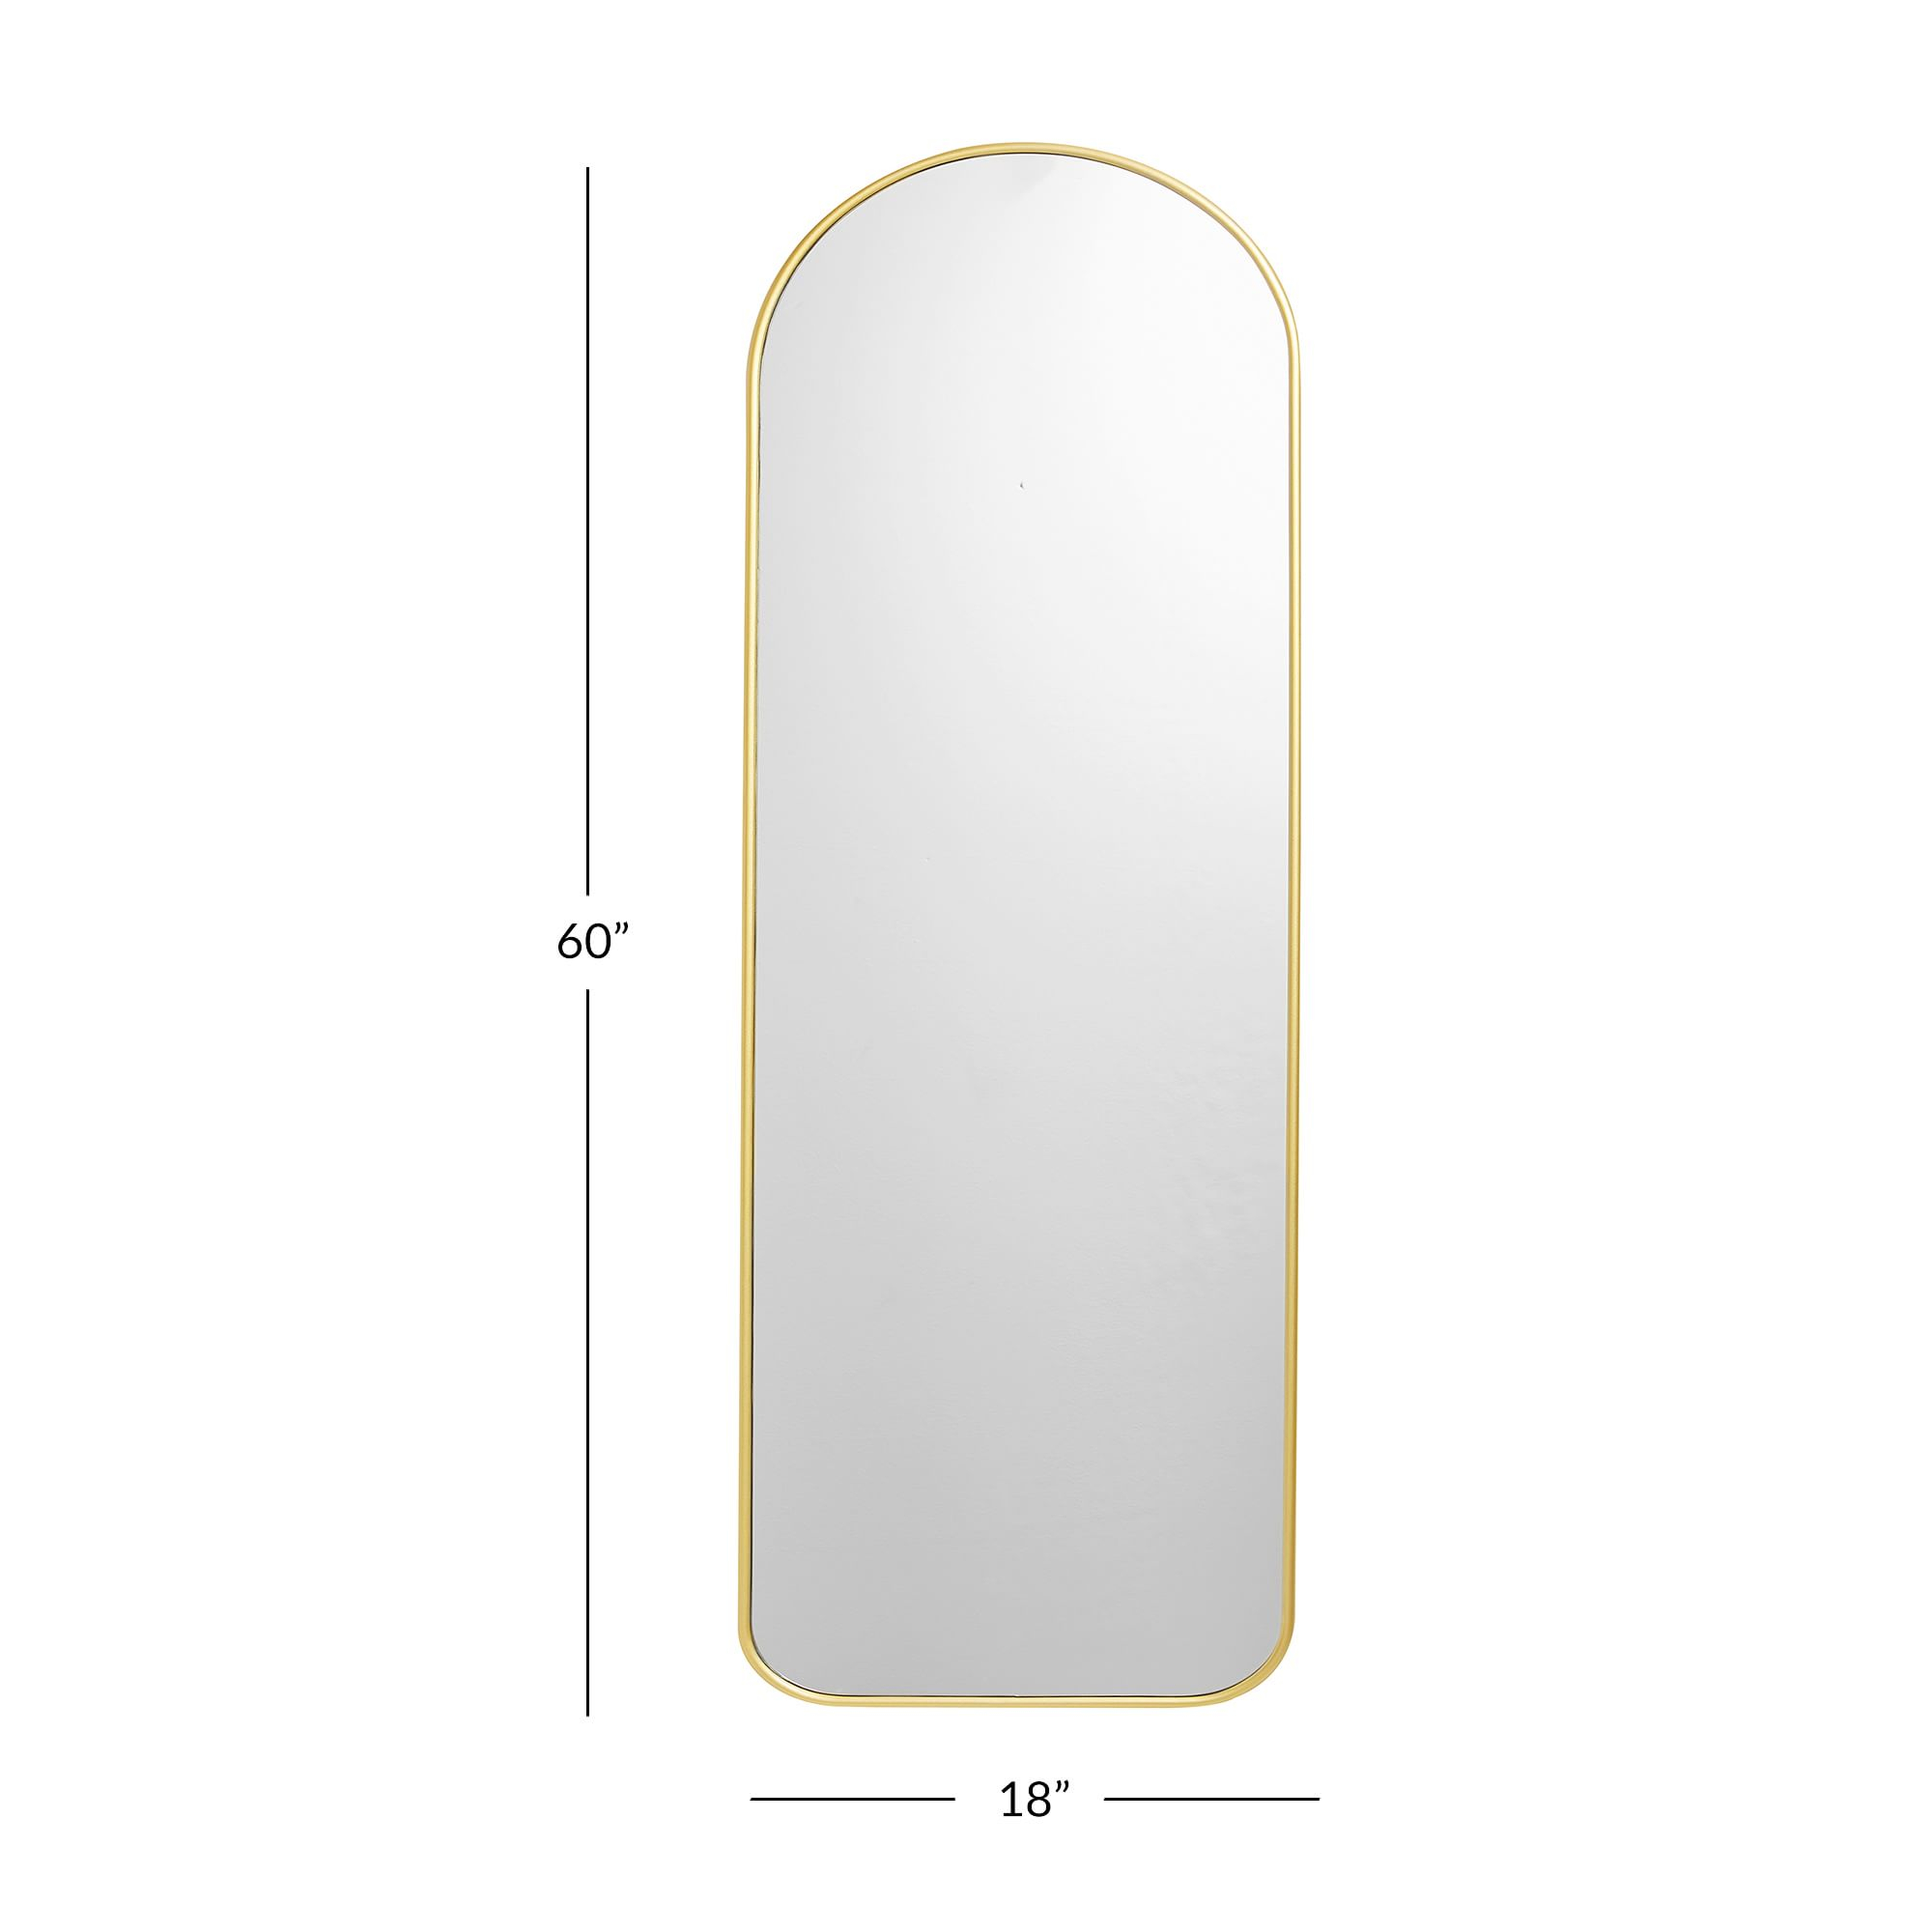 Metal Framed Full Length Mirror, Rounded Square, Tuscan Gold - Pottery Barn Teen